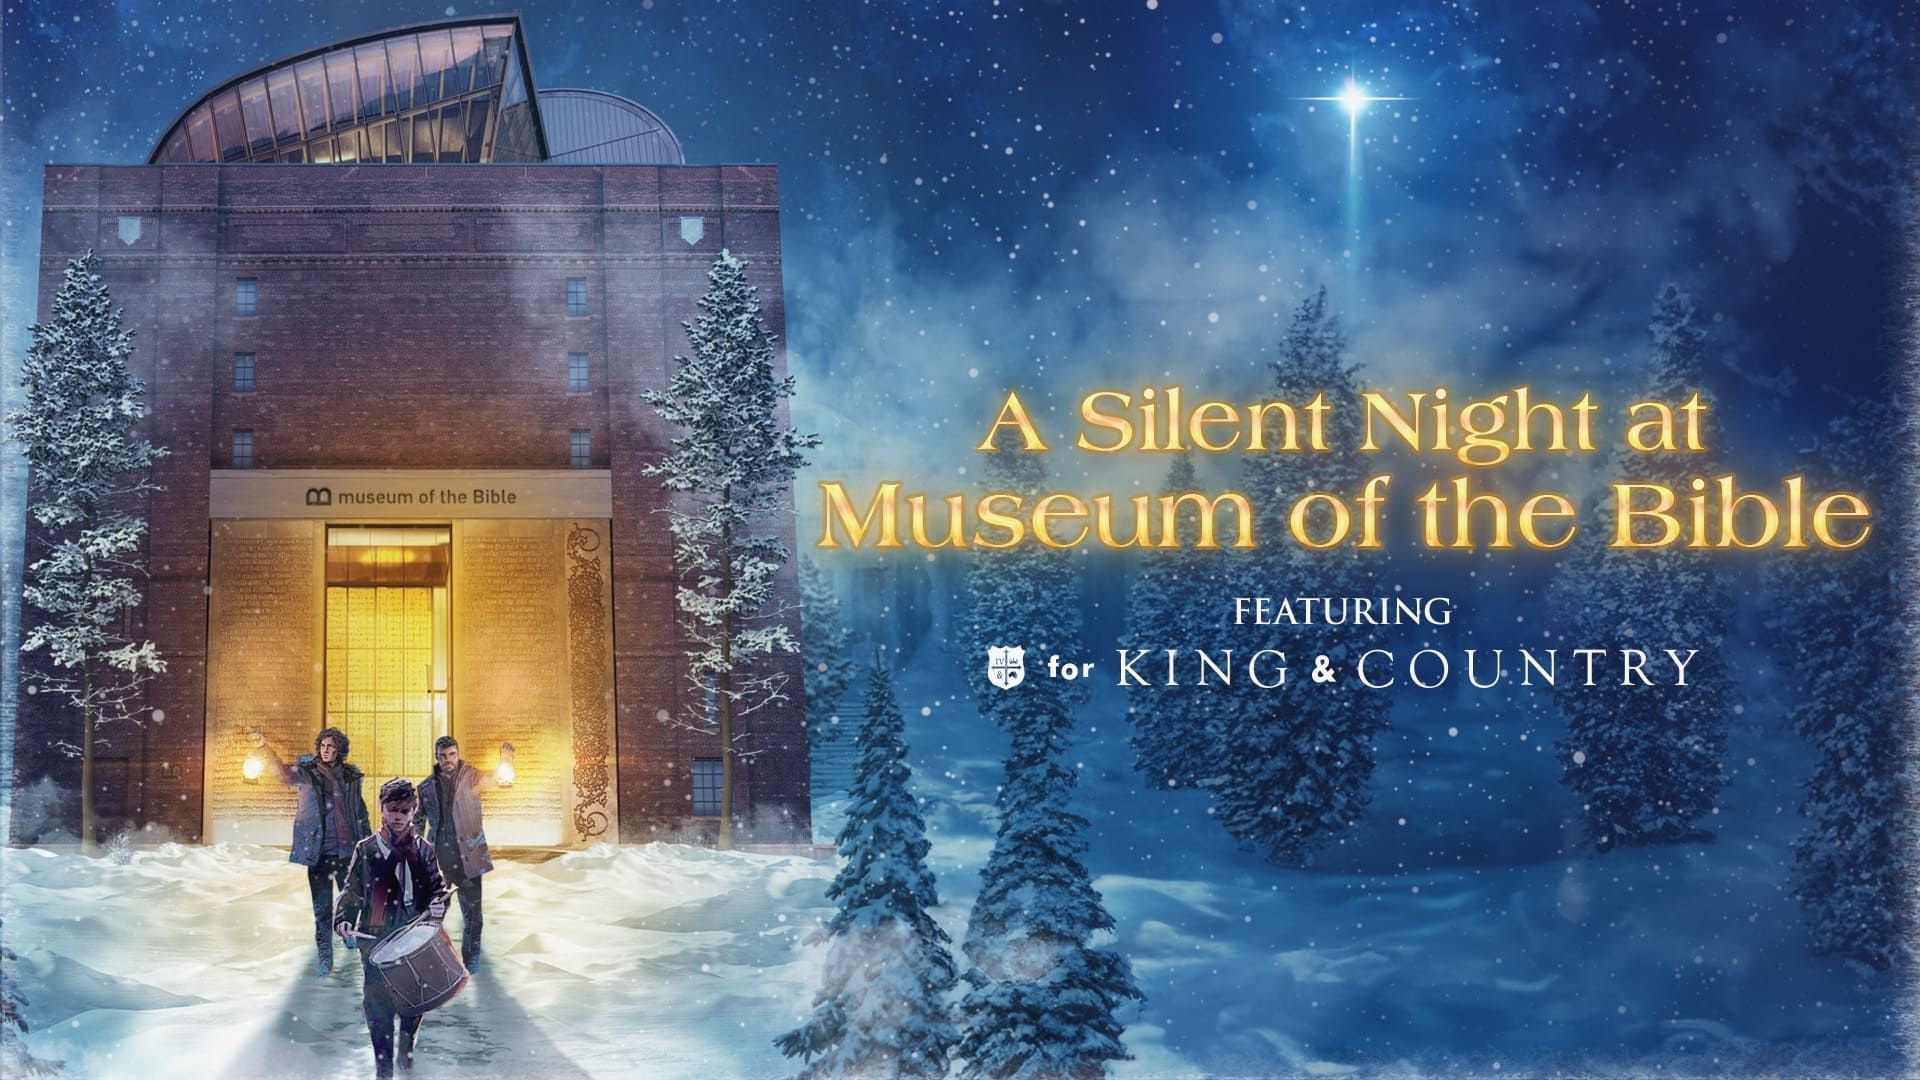 A silent Night at Museum of the Bible featuring for King & Country background